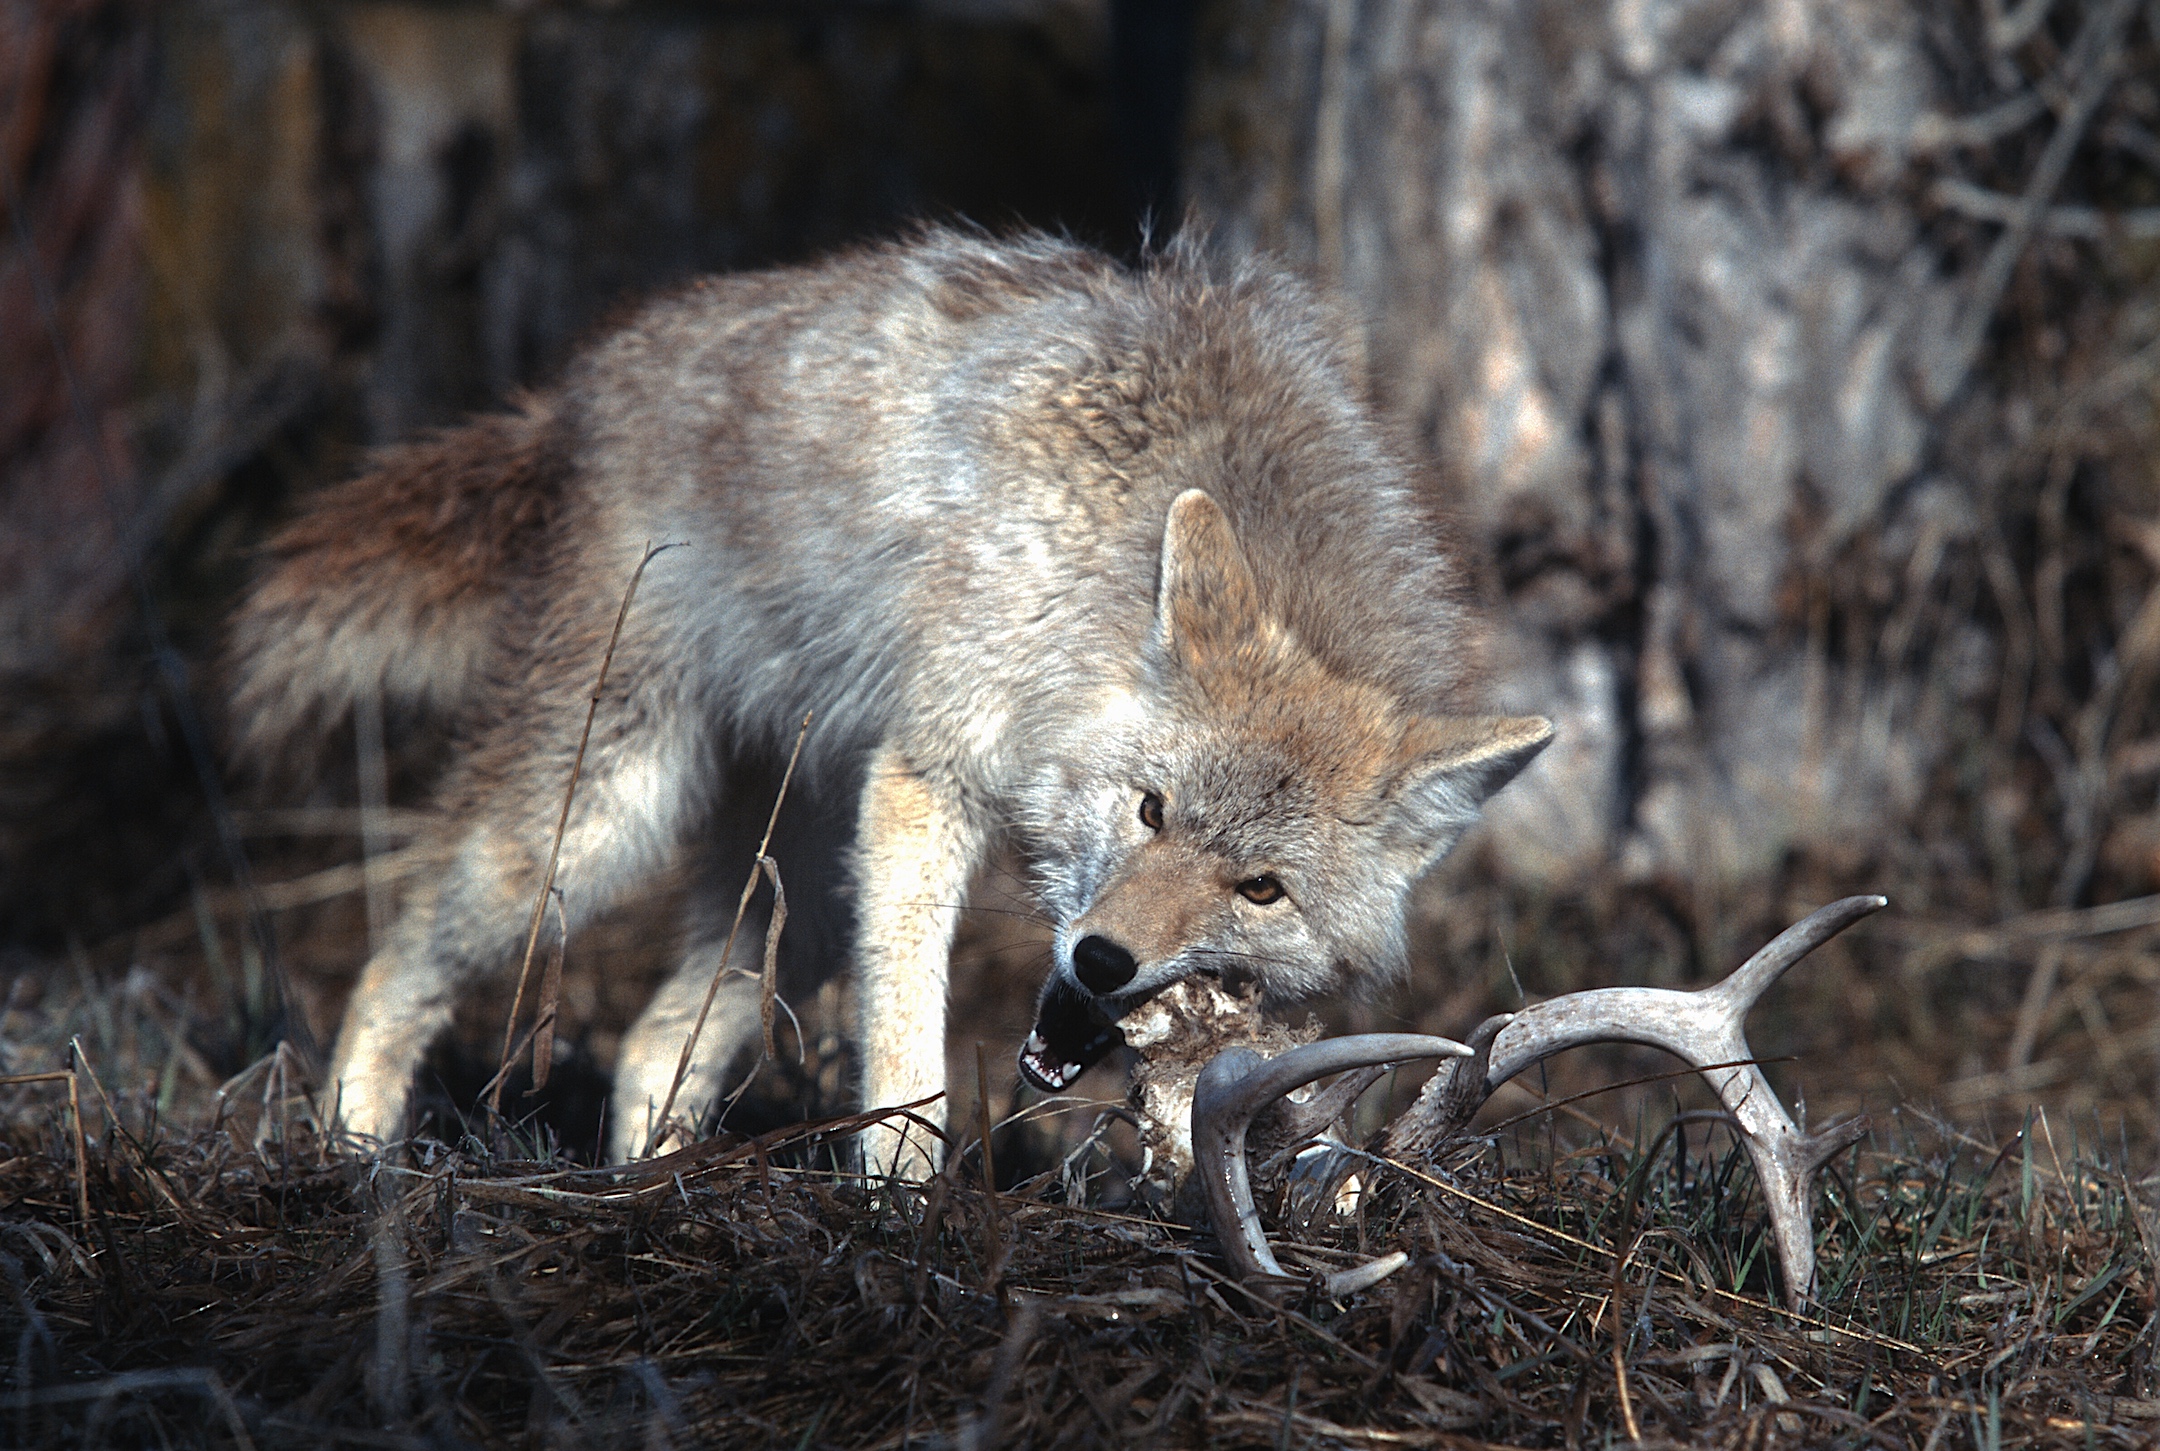 The .220 can kill coyotes at longer distances than many of the more traditional varmint loads.